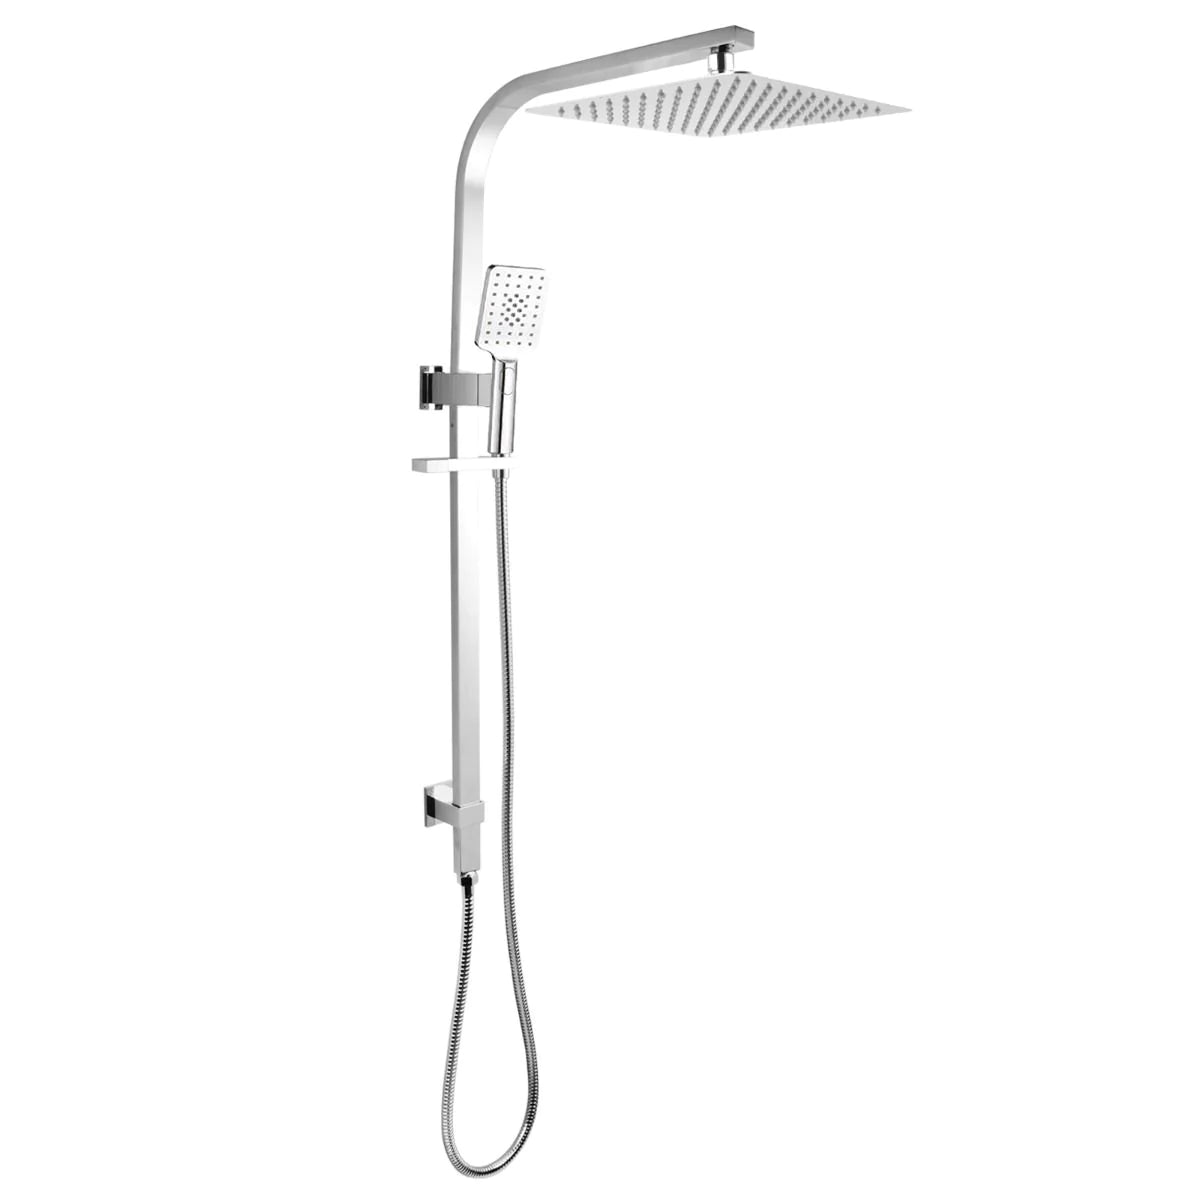 Square shower station with top water inlet, 10 inches-Chrome-CH2130_SH_N+CH0002_SH+CH-S8_HHS